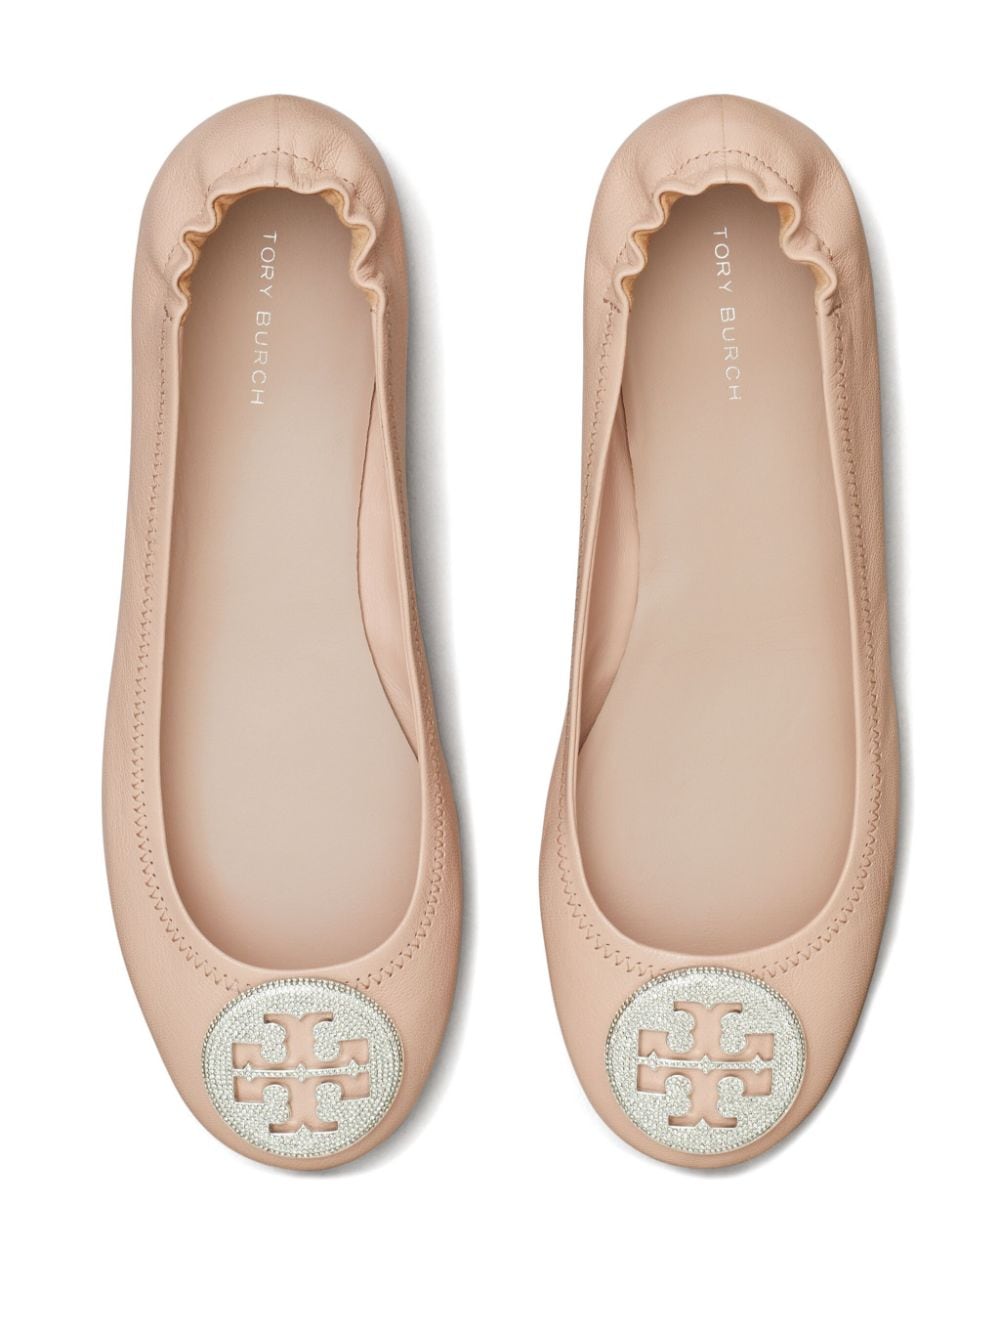 Shop Tory Burch Minnie Travel Leather Ballerina Shoes In Pink